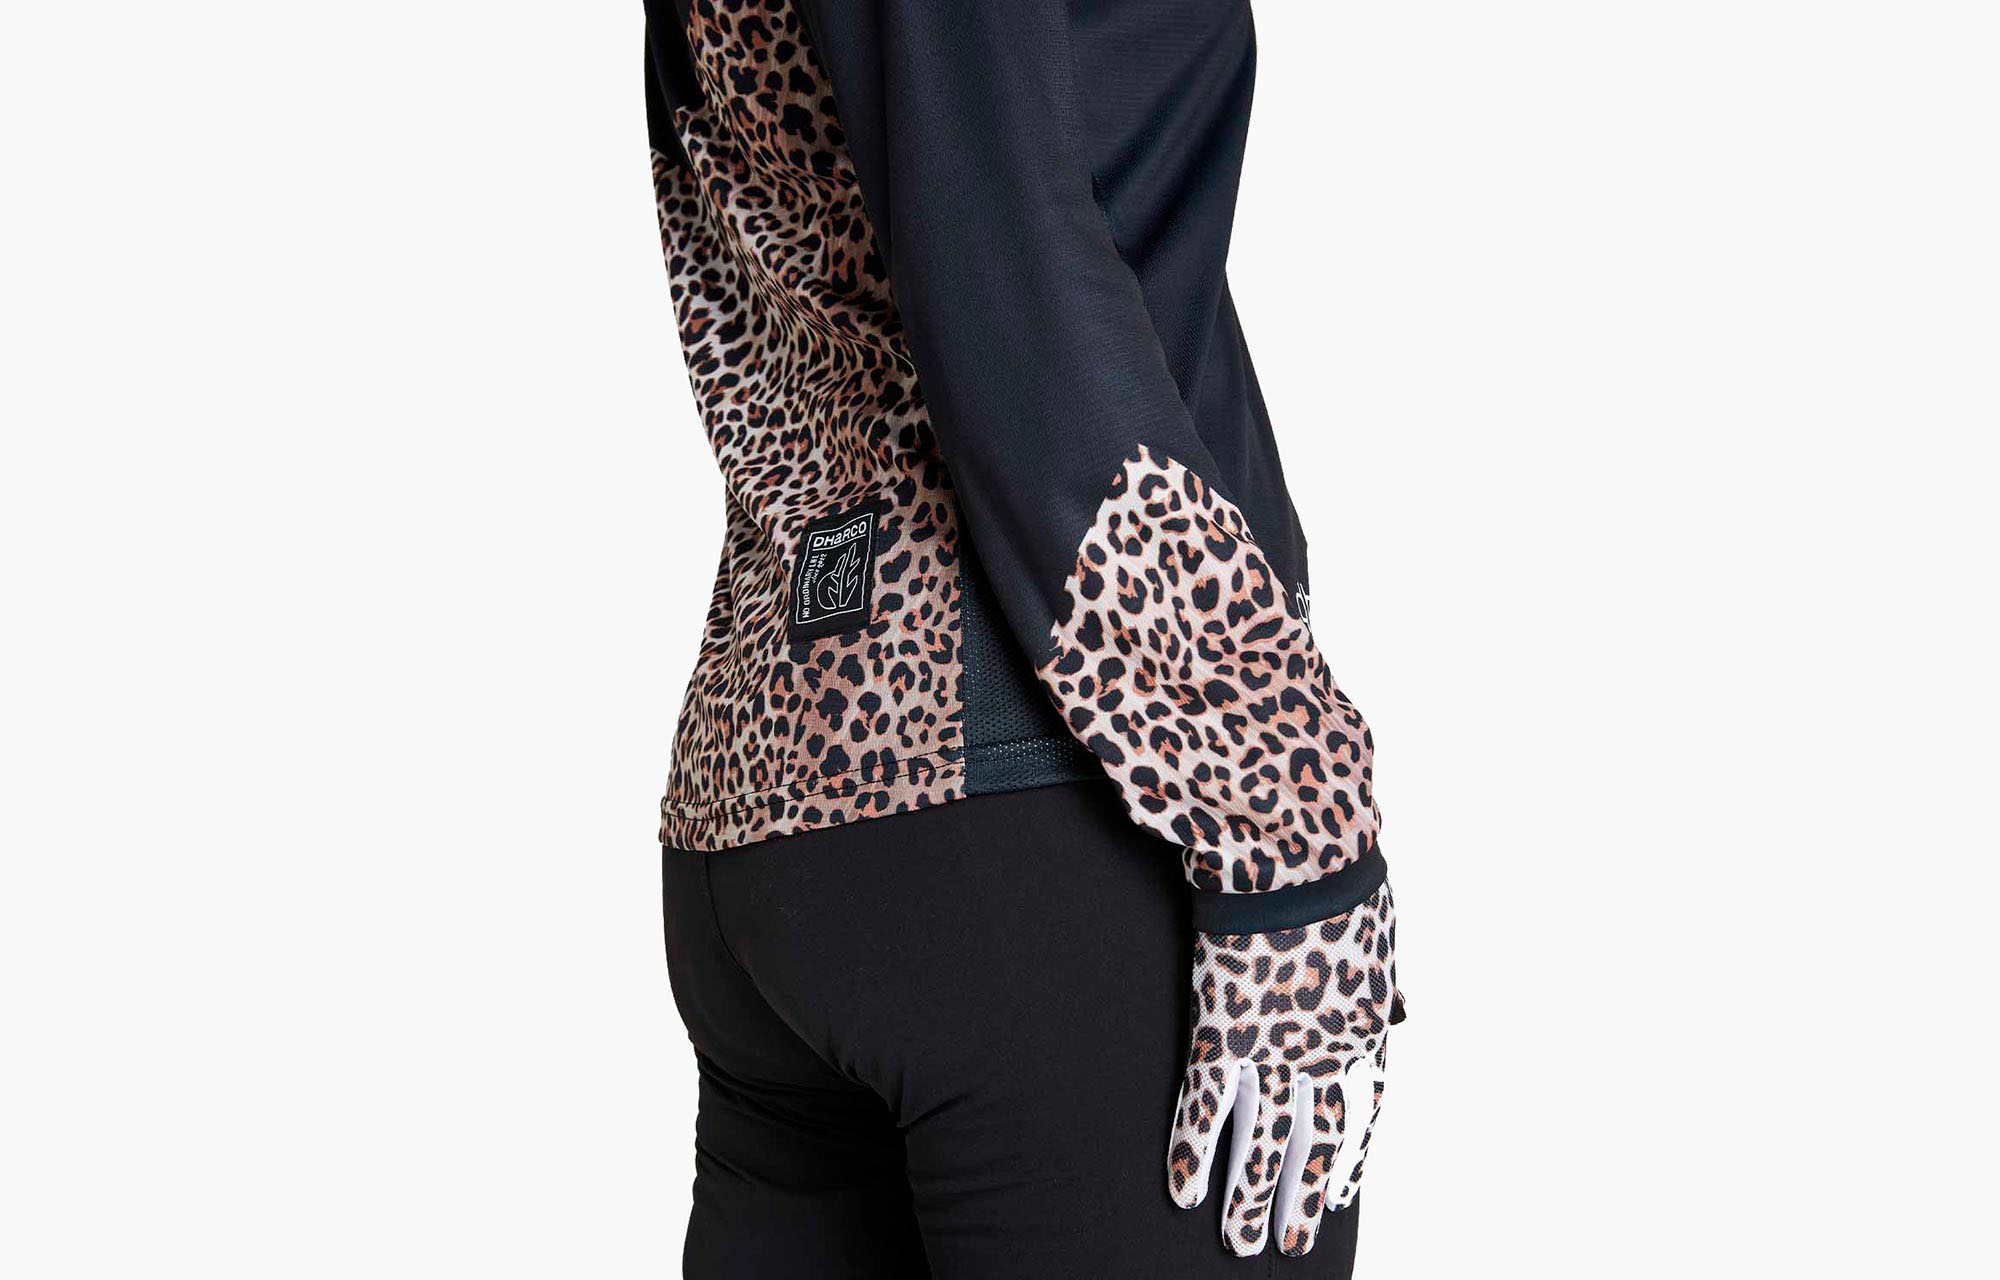 DHARCO WOMEN LONG SLEEVE JERSEY LEOPARD image number 1